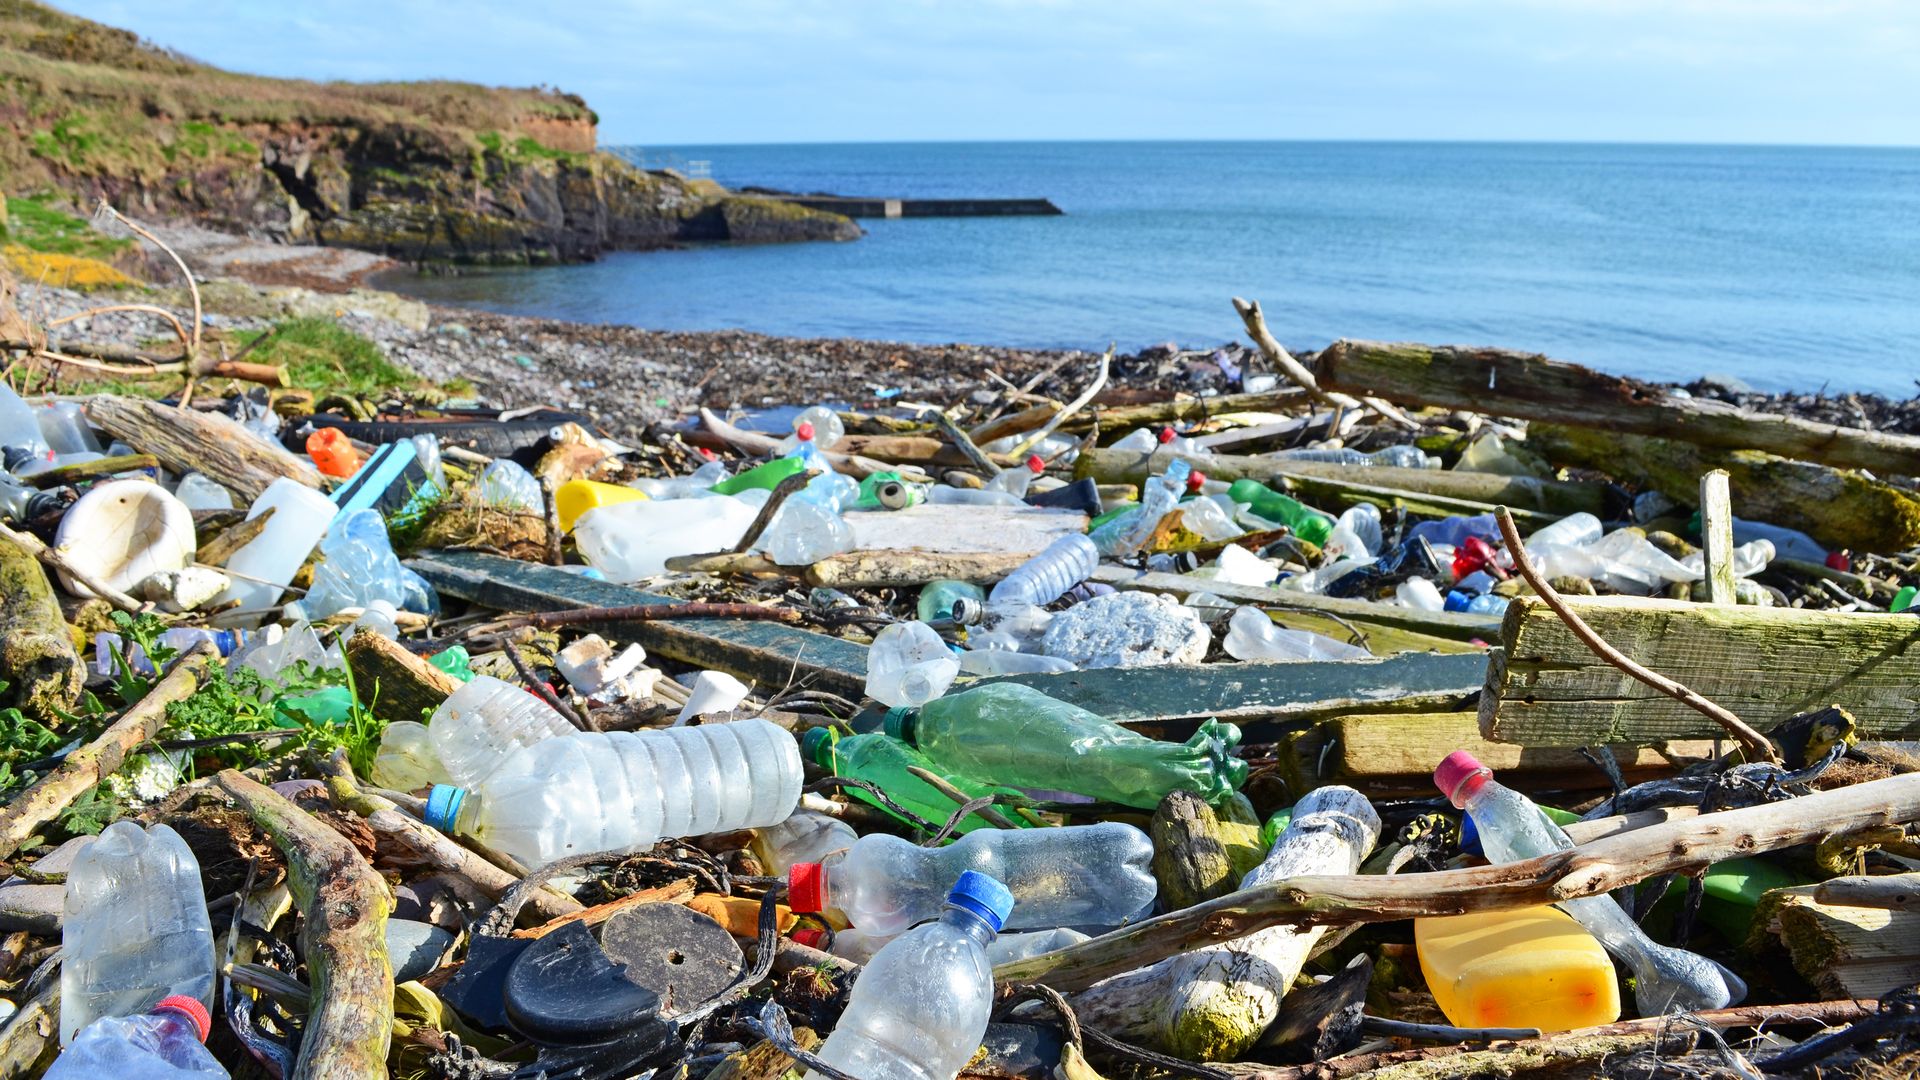 In this image, piles of bottles and other trash are seen on a beach near a cliff.